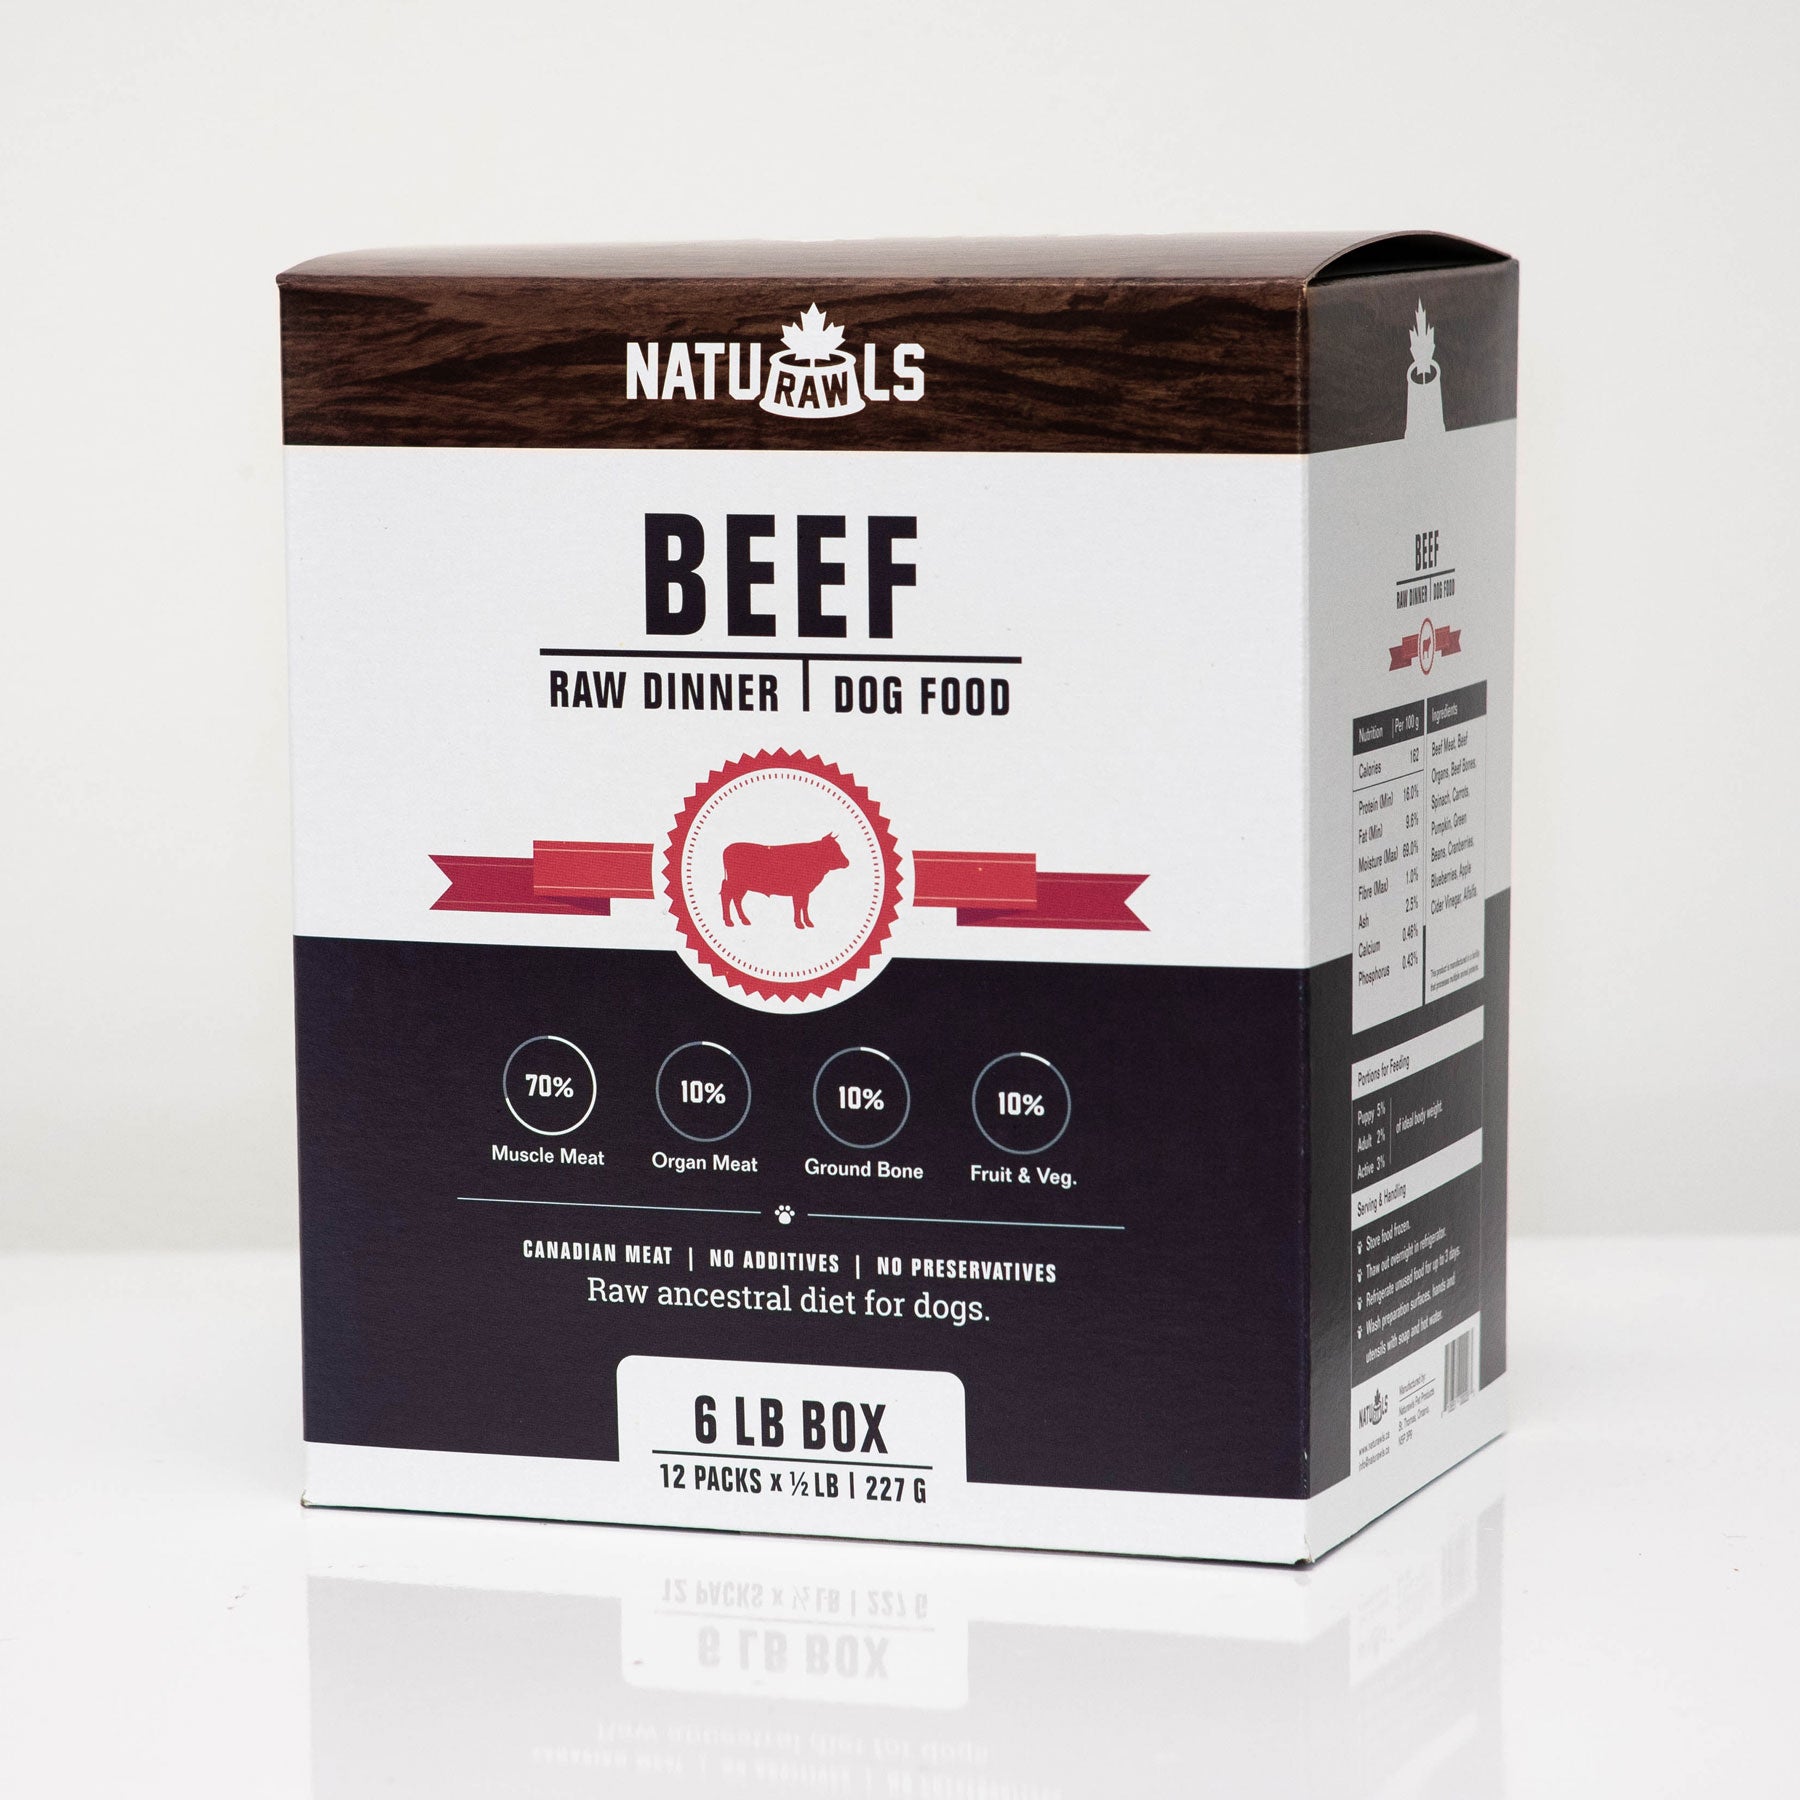 NATURAWLS - BEEF DINNER - Woofur Natural Pet Products